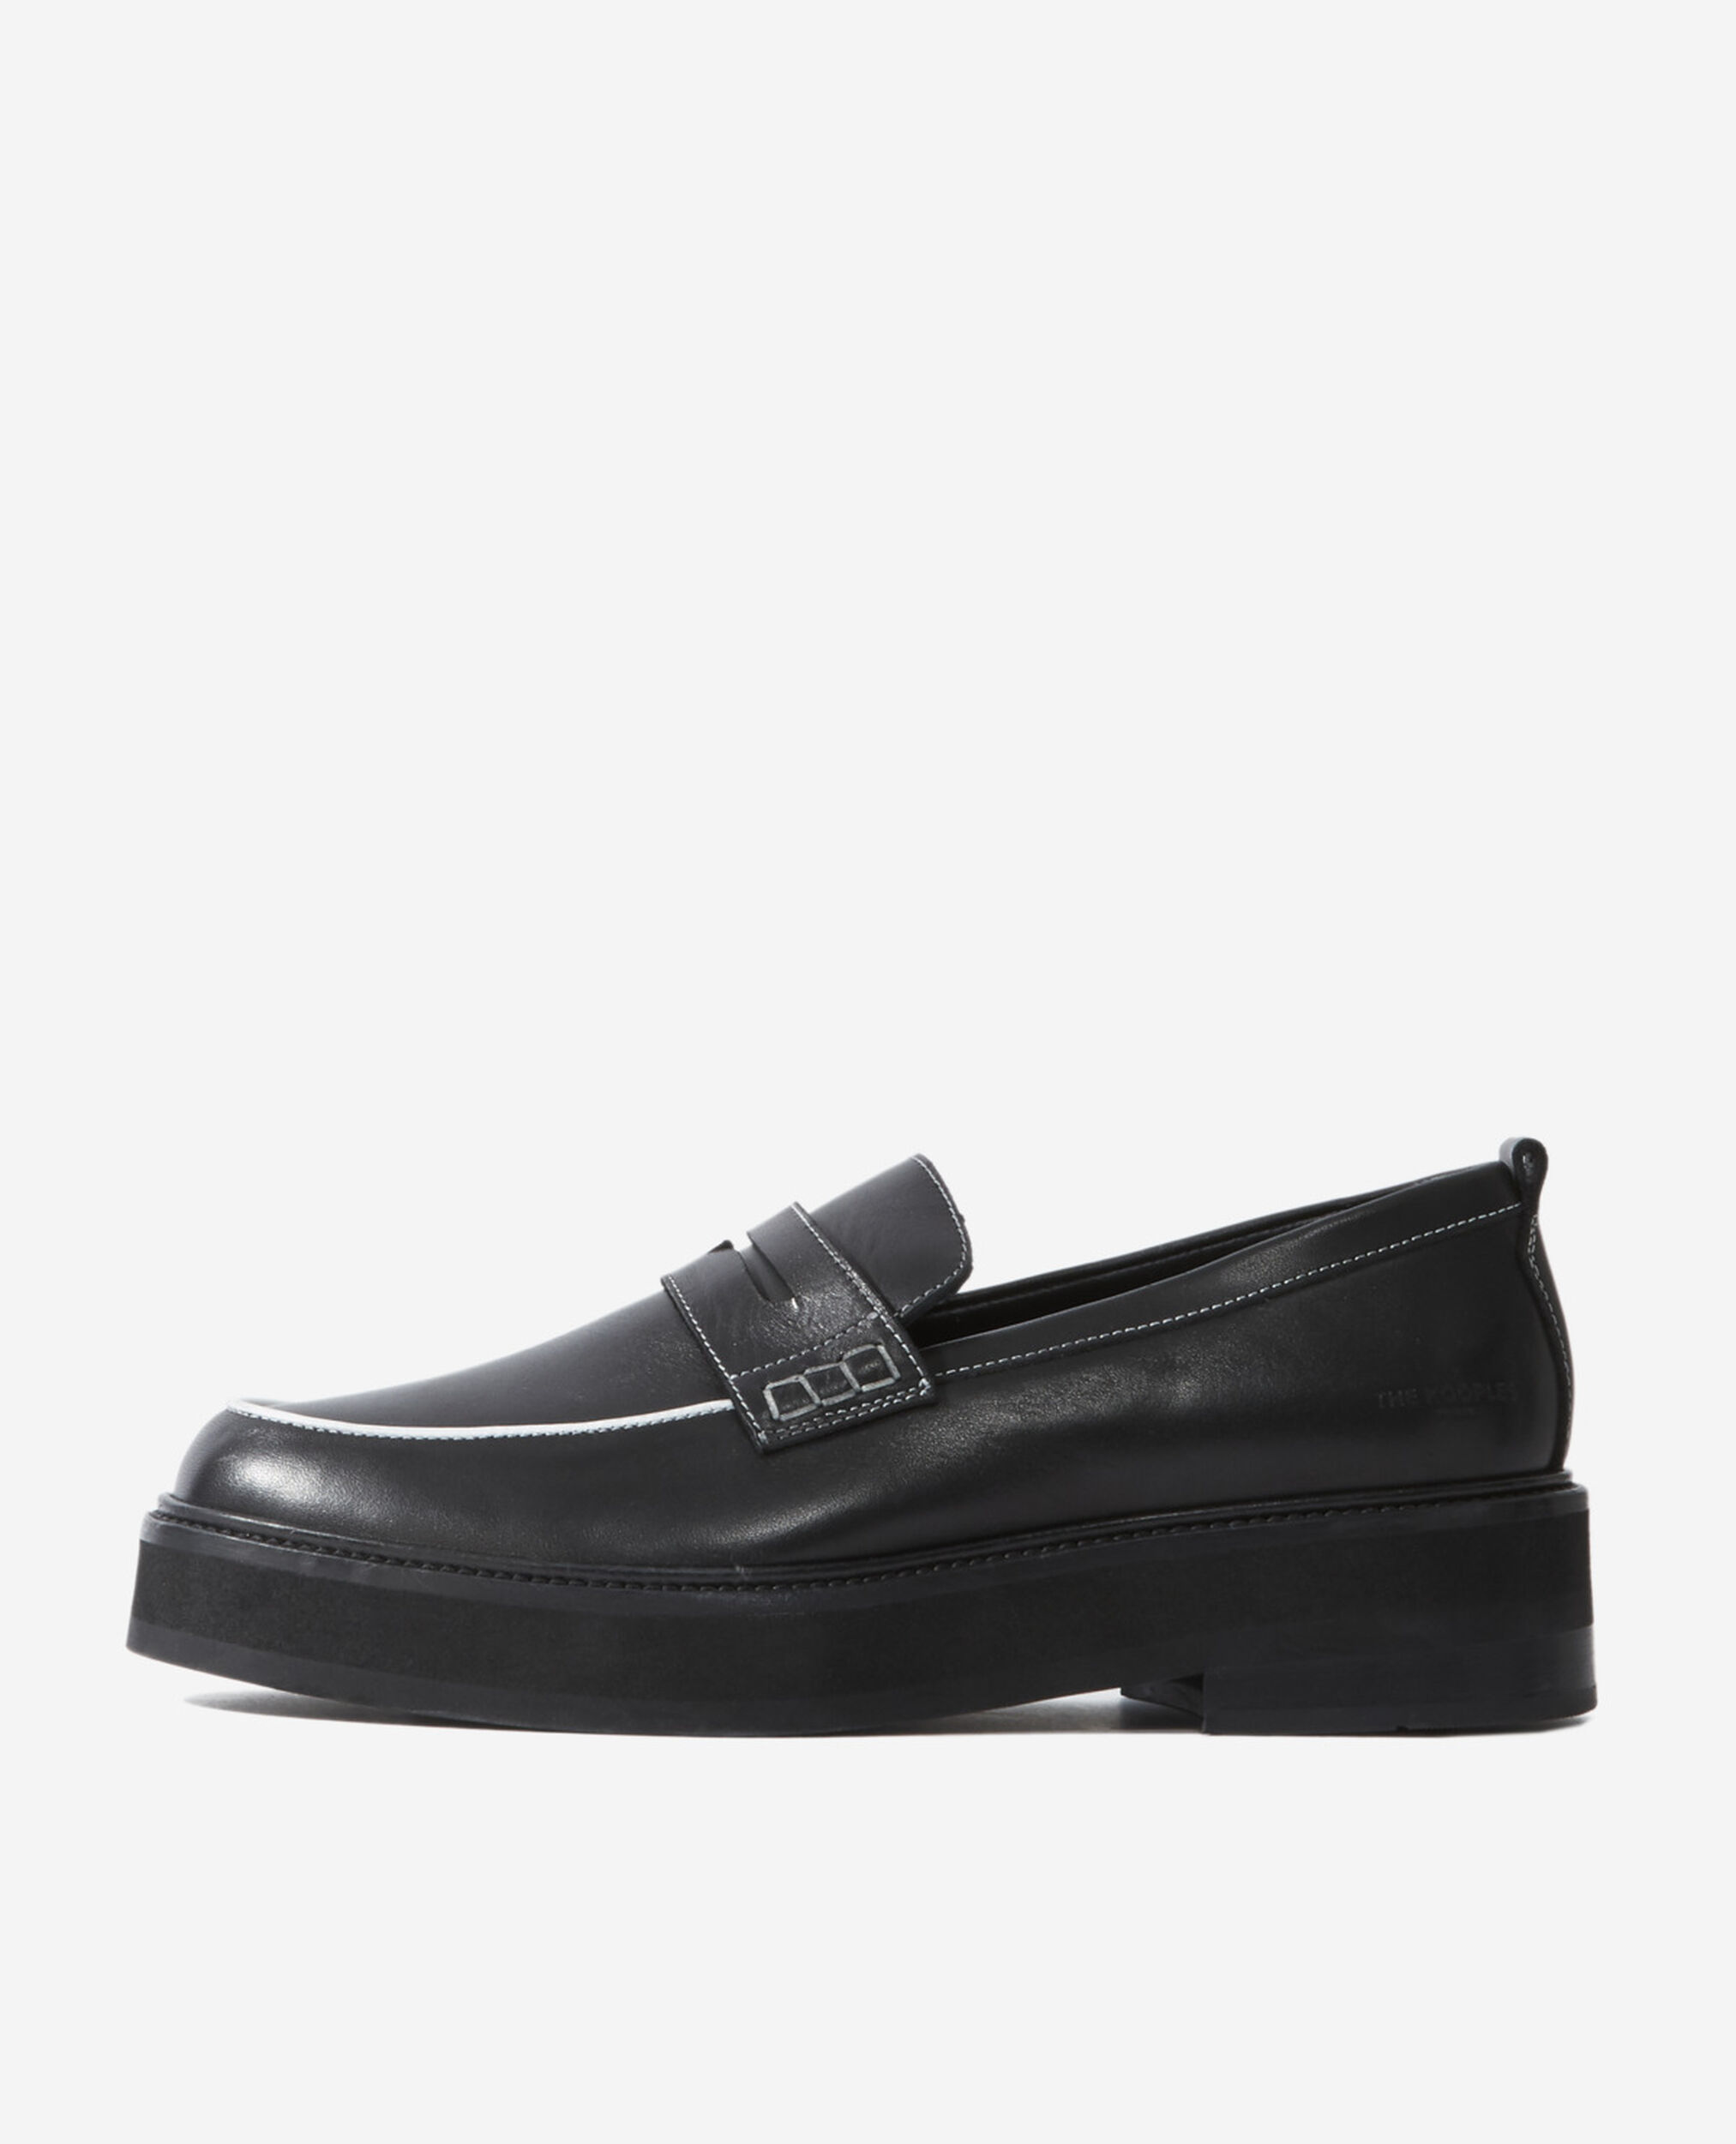 Black leather moccasins with contrast trims, BLACK, hi-res image number null